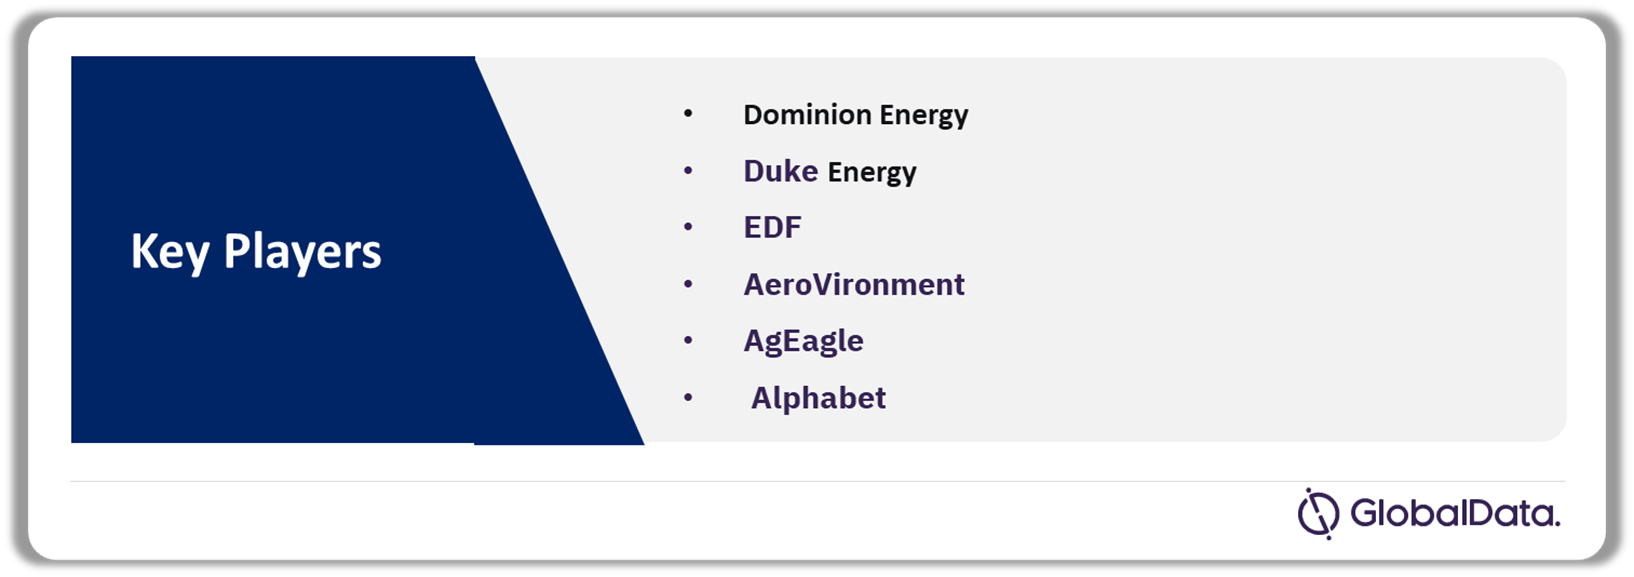 Key Power Utility and Drone Companies in the Drones Theme